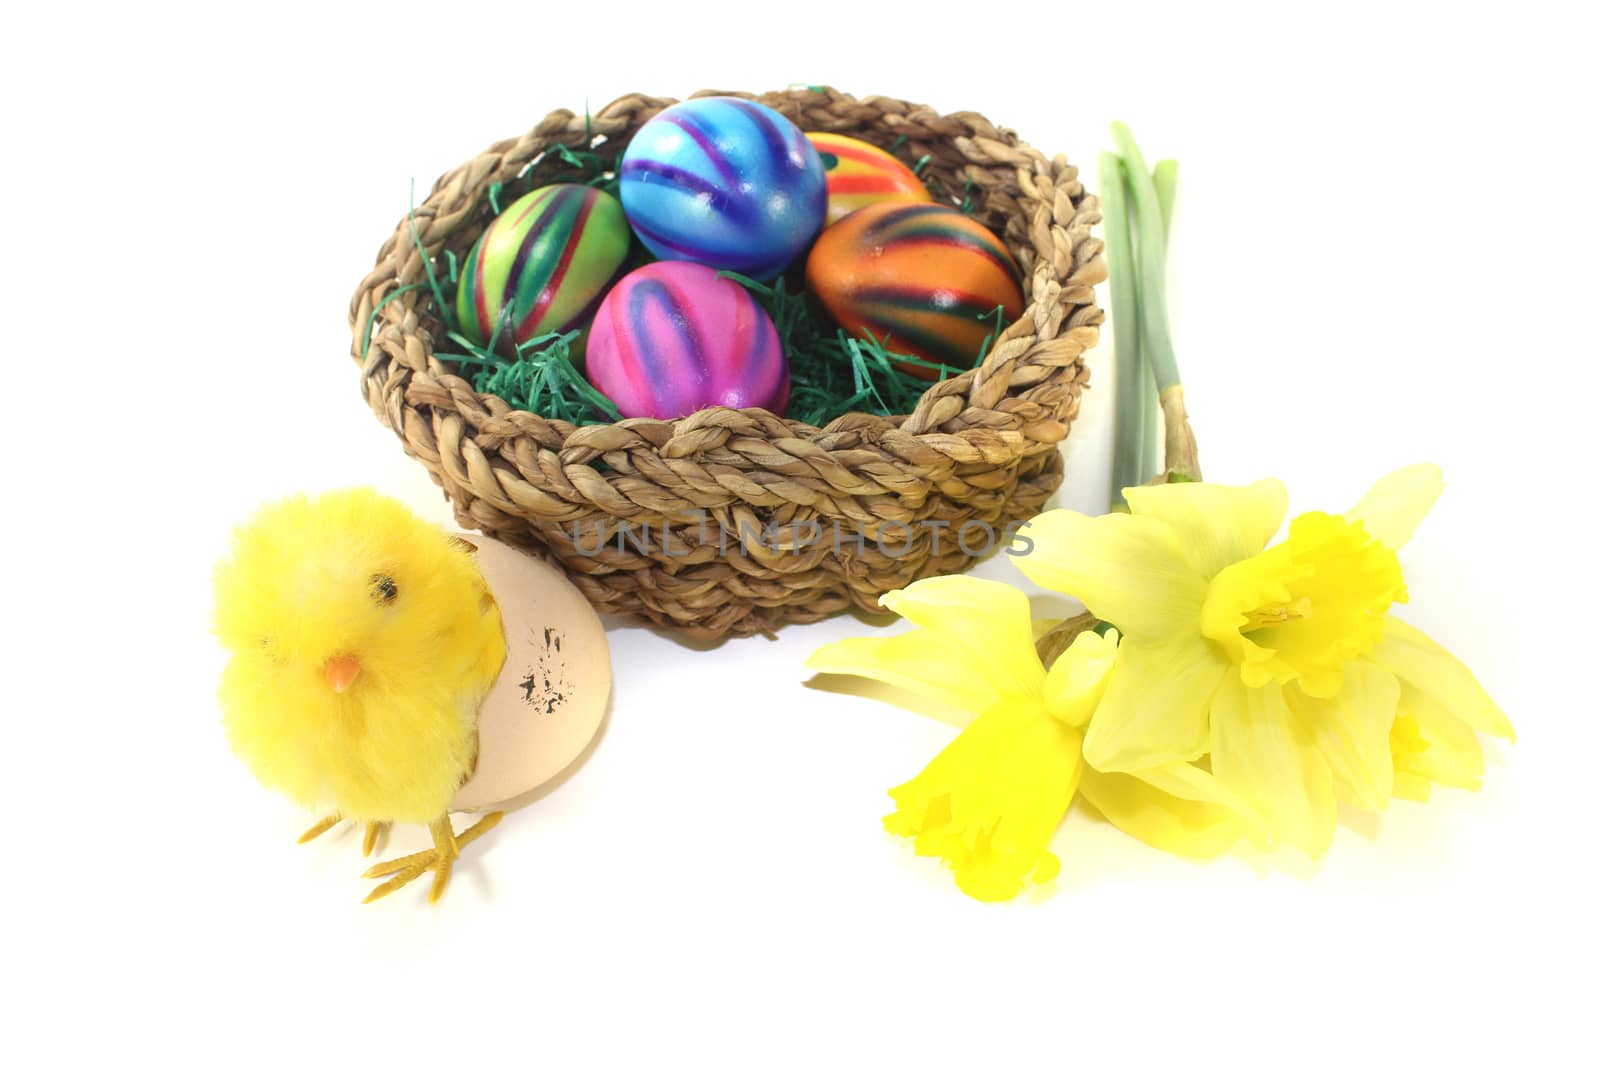 Easter Basket with chick and eggs on a light background